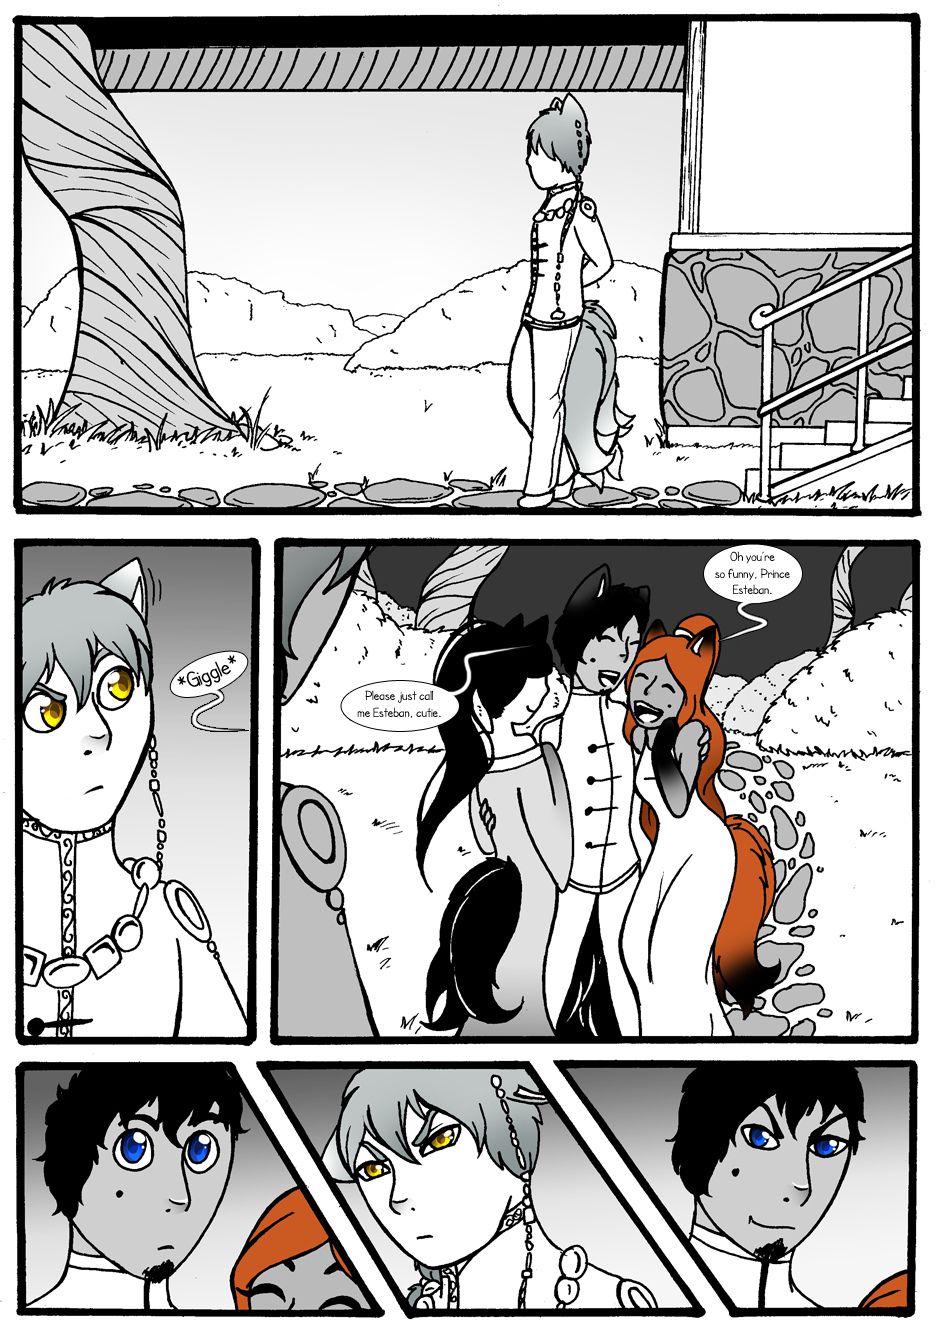 [Jeny-jen94]Between Kings and Queens[ongoing] 29